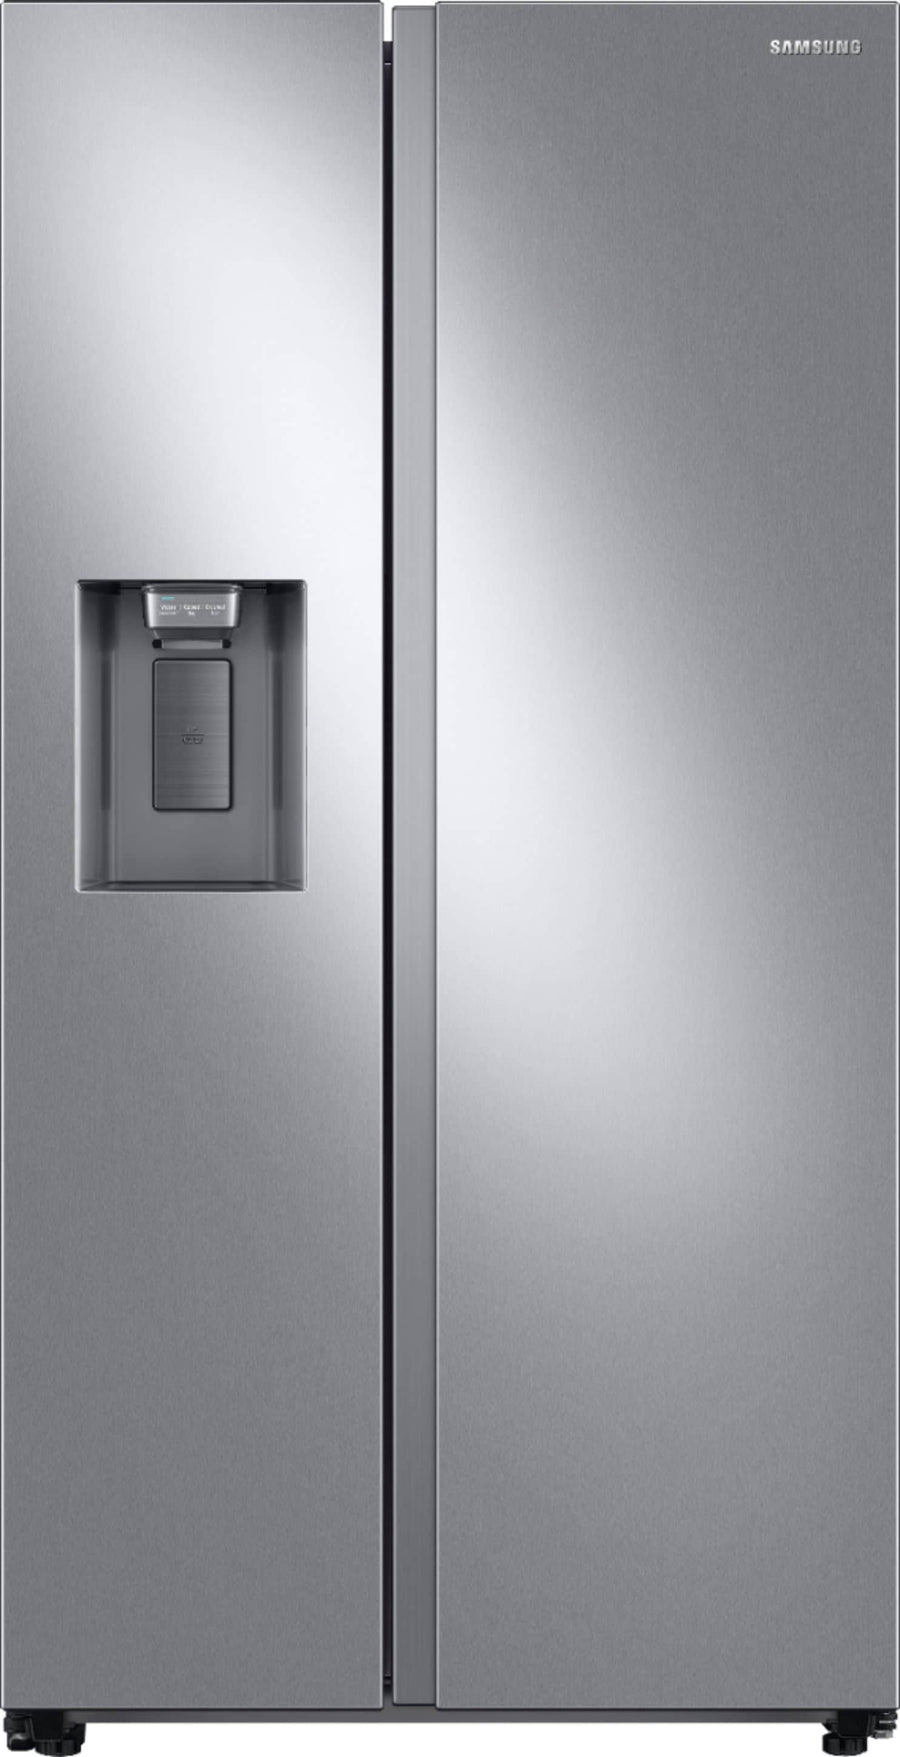 Samsung - 27.4 Cu. Ft. Side-by-Side Refrigerator - Stainless steel_0